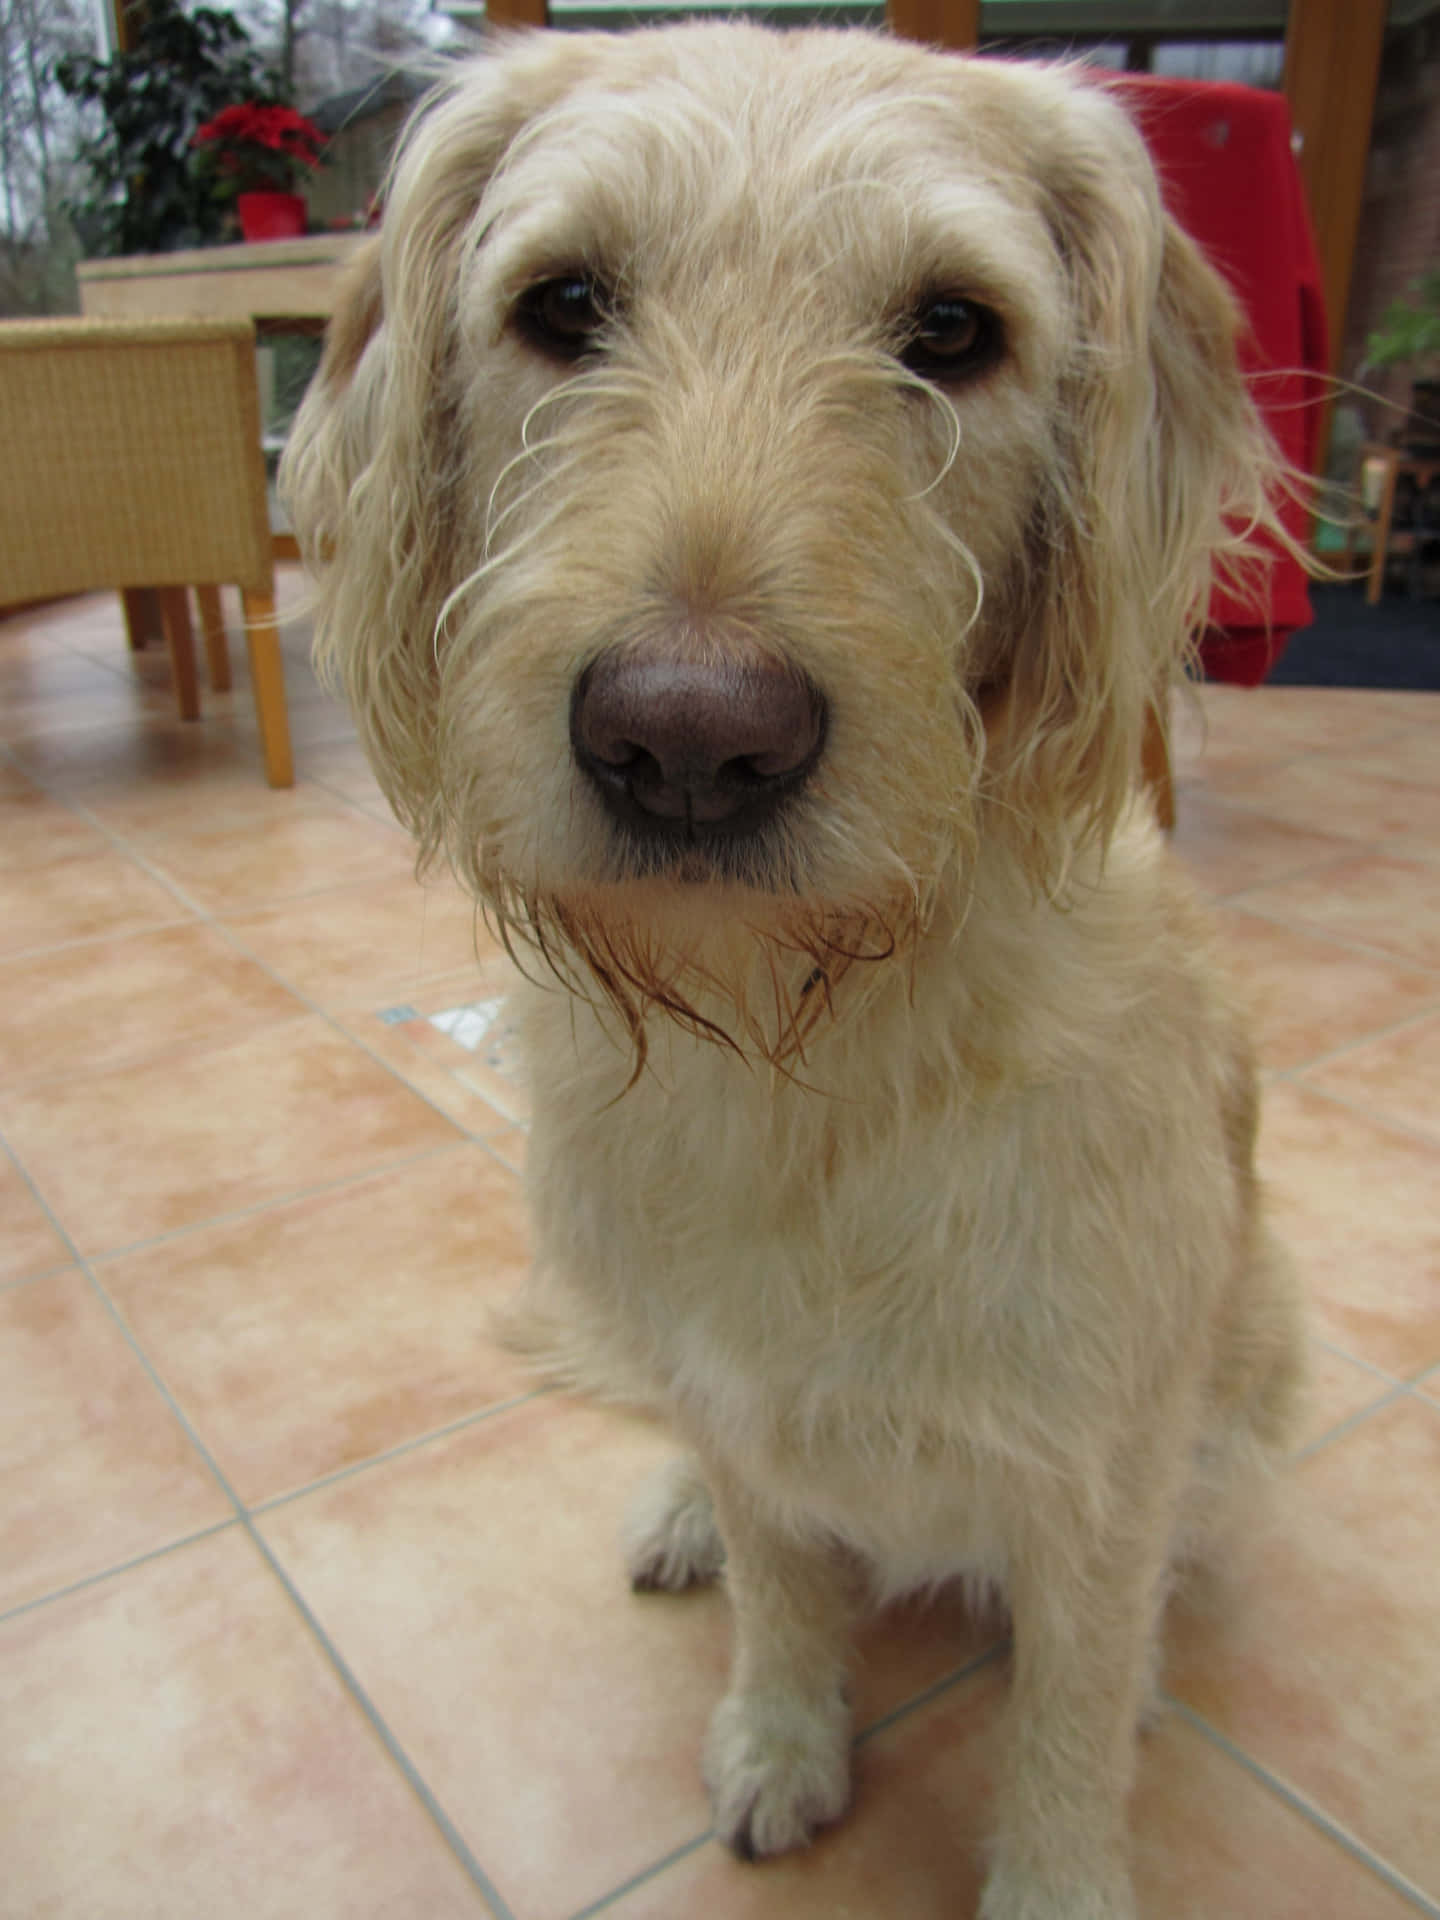 "This sweet Labradoodle is ready for cuddles and walks"